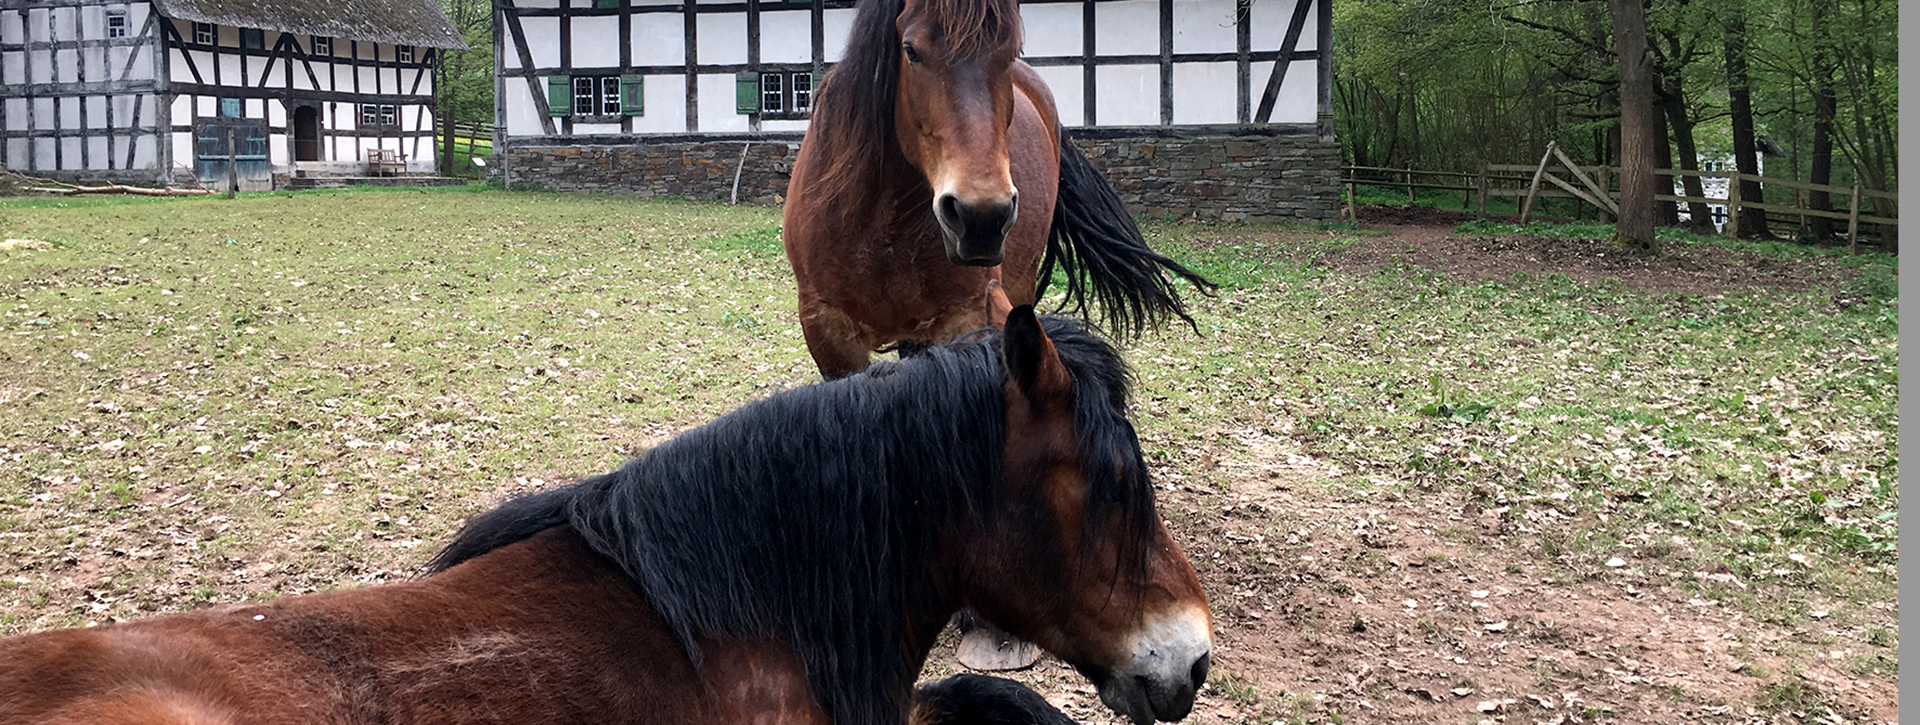 Two brown horses on a meadow in front of a half-timbered house.